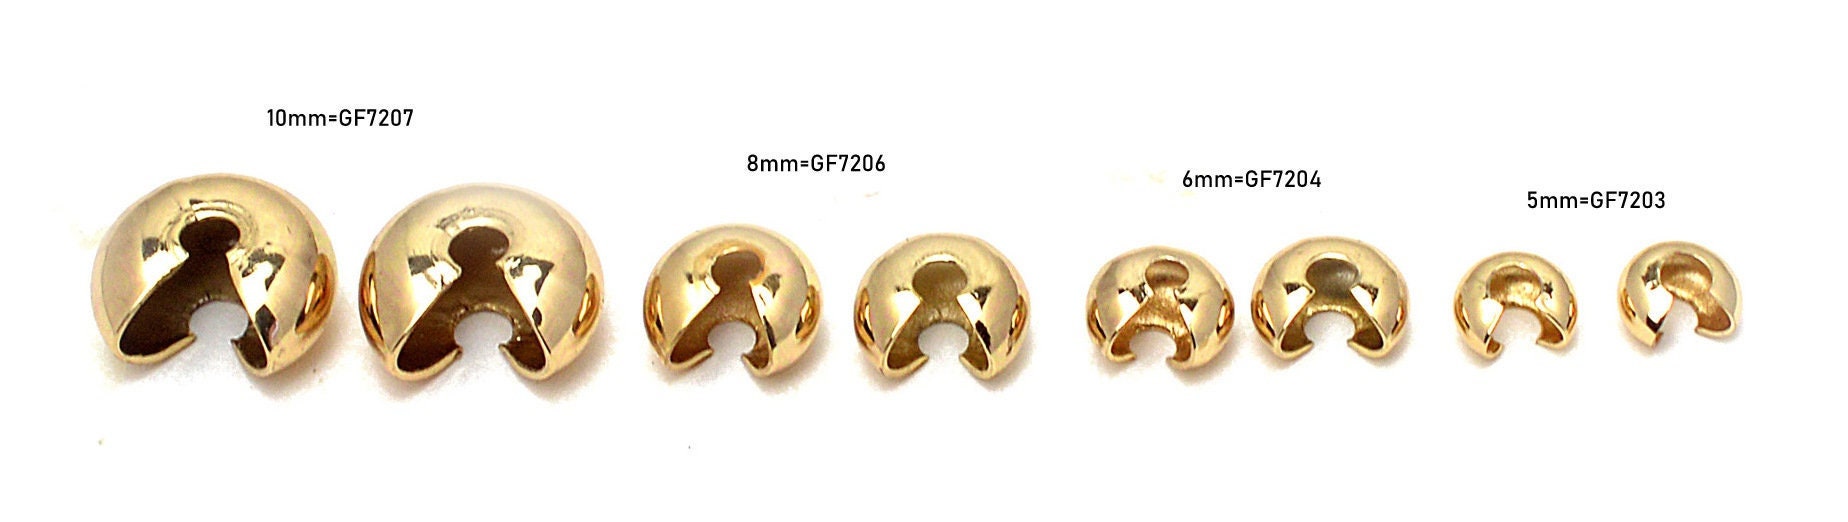 ball chain crimp cover end tip beads 18k gold filled EP for jewelry supplier findings and wholesale